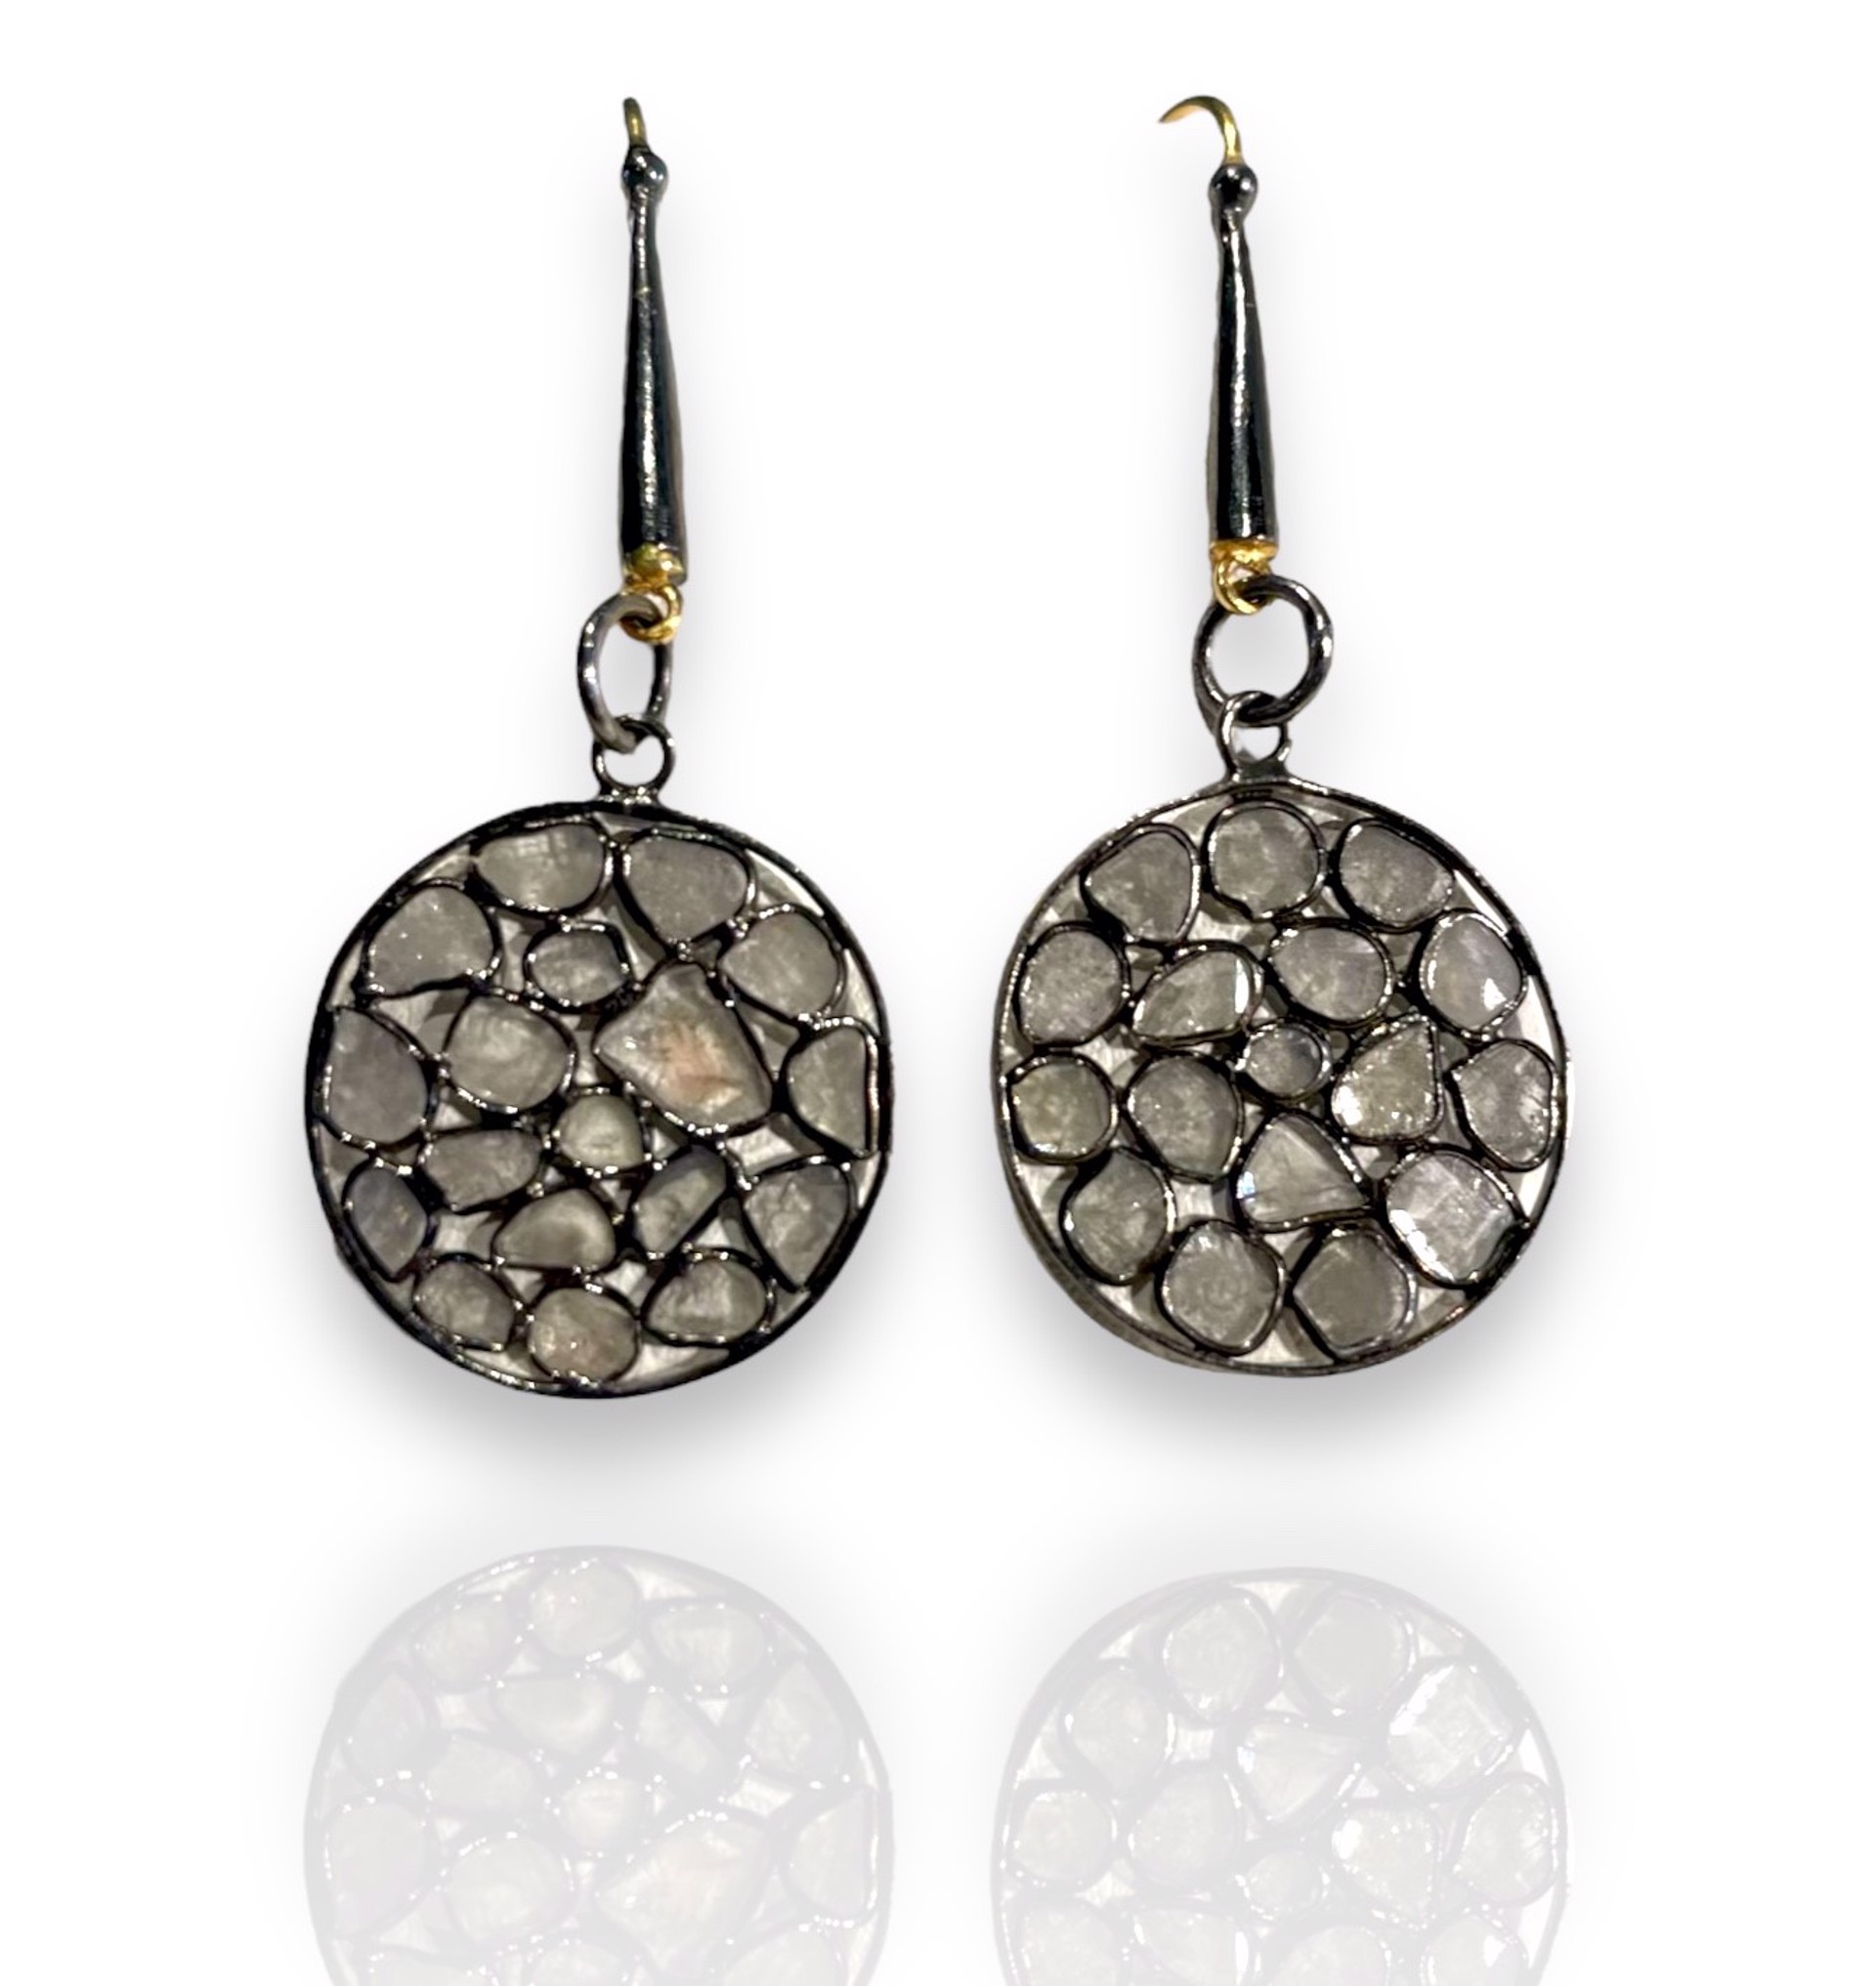 Earrings- Diamond Slices, bezel set in Oxidized Silver with 18k Gold wires by Mara Labell